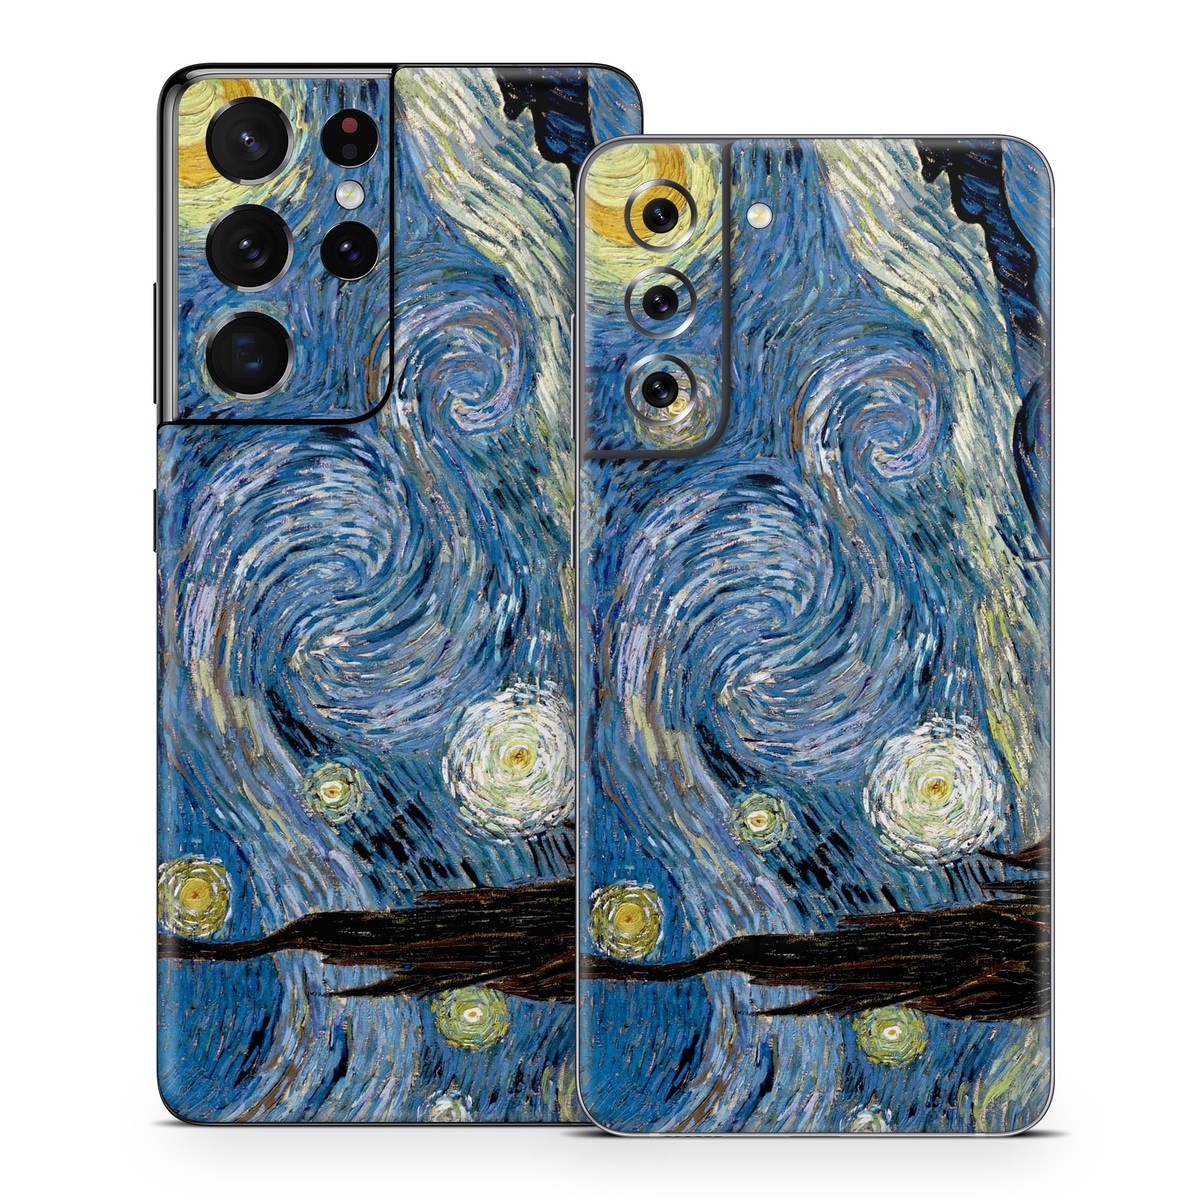 Samsung Galaxy S21 Series Skin design of Painting, Purple, Art, Tree, Illustration, Organism, Watercolor paint, Space, Modern art, Plant, with gray, black, blue, green colors